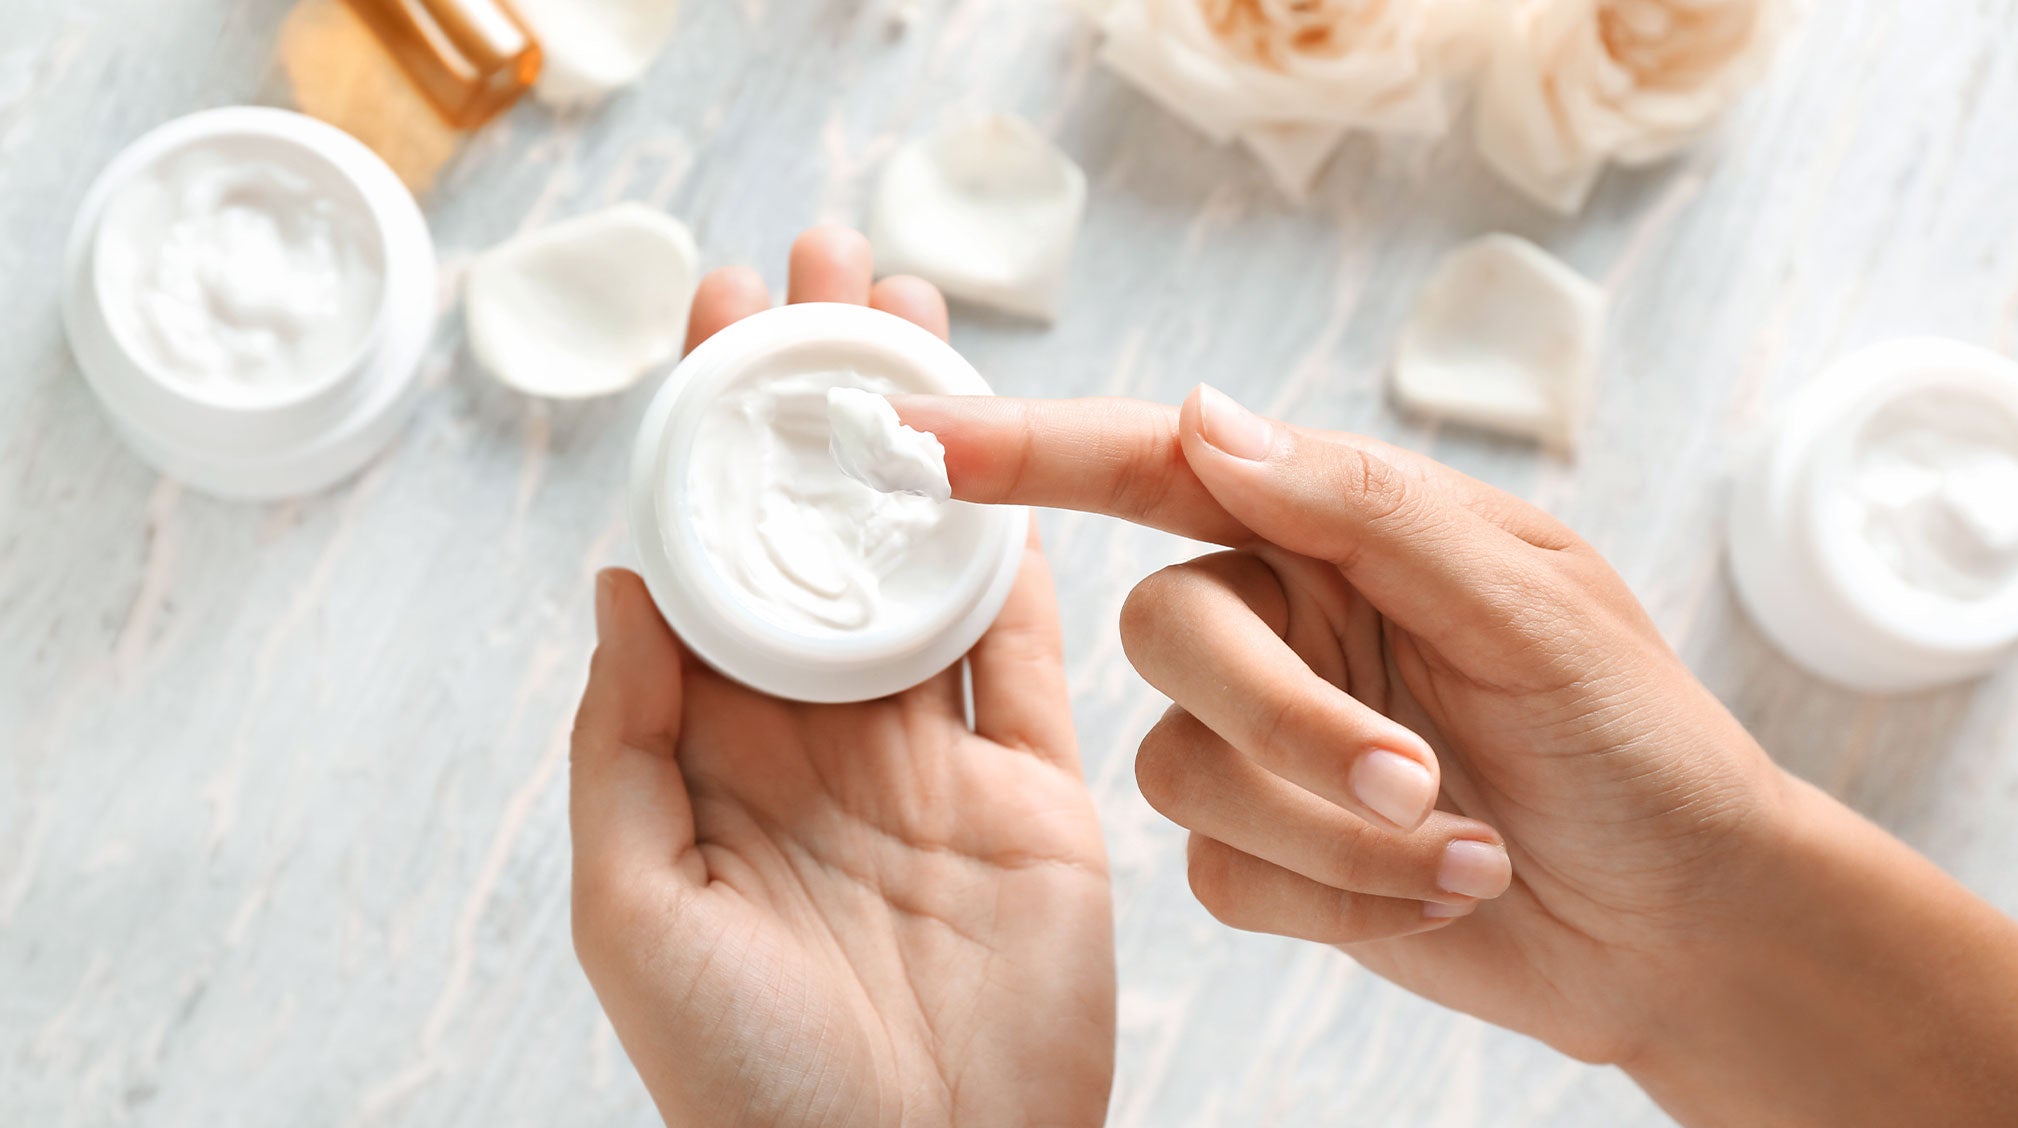 Silicone for skin: Uses, benefits, risks, and more